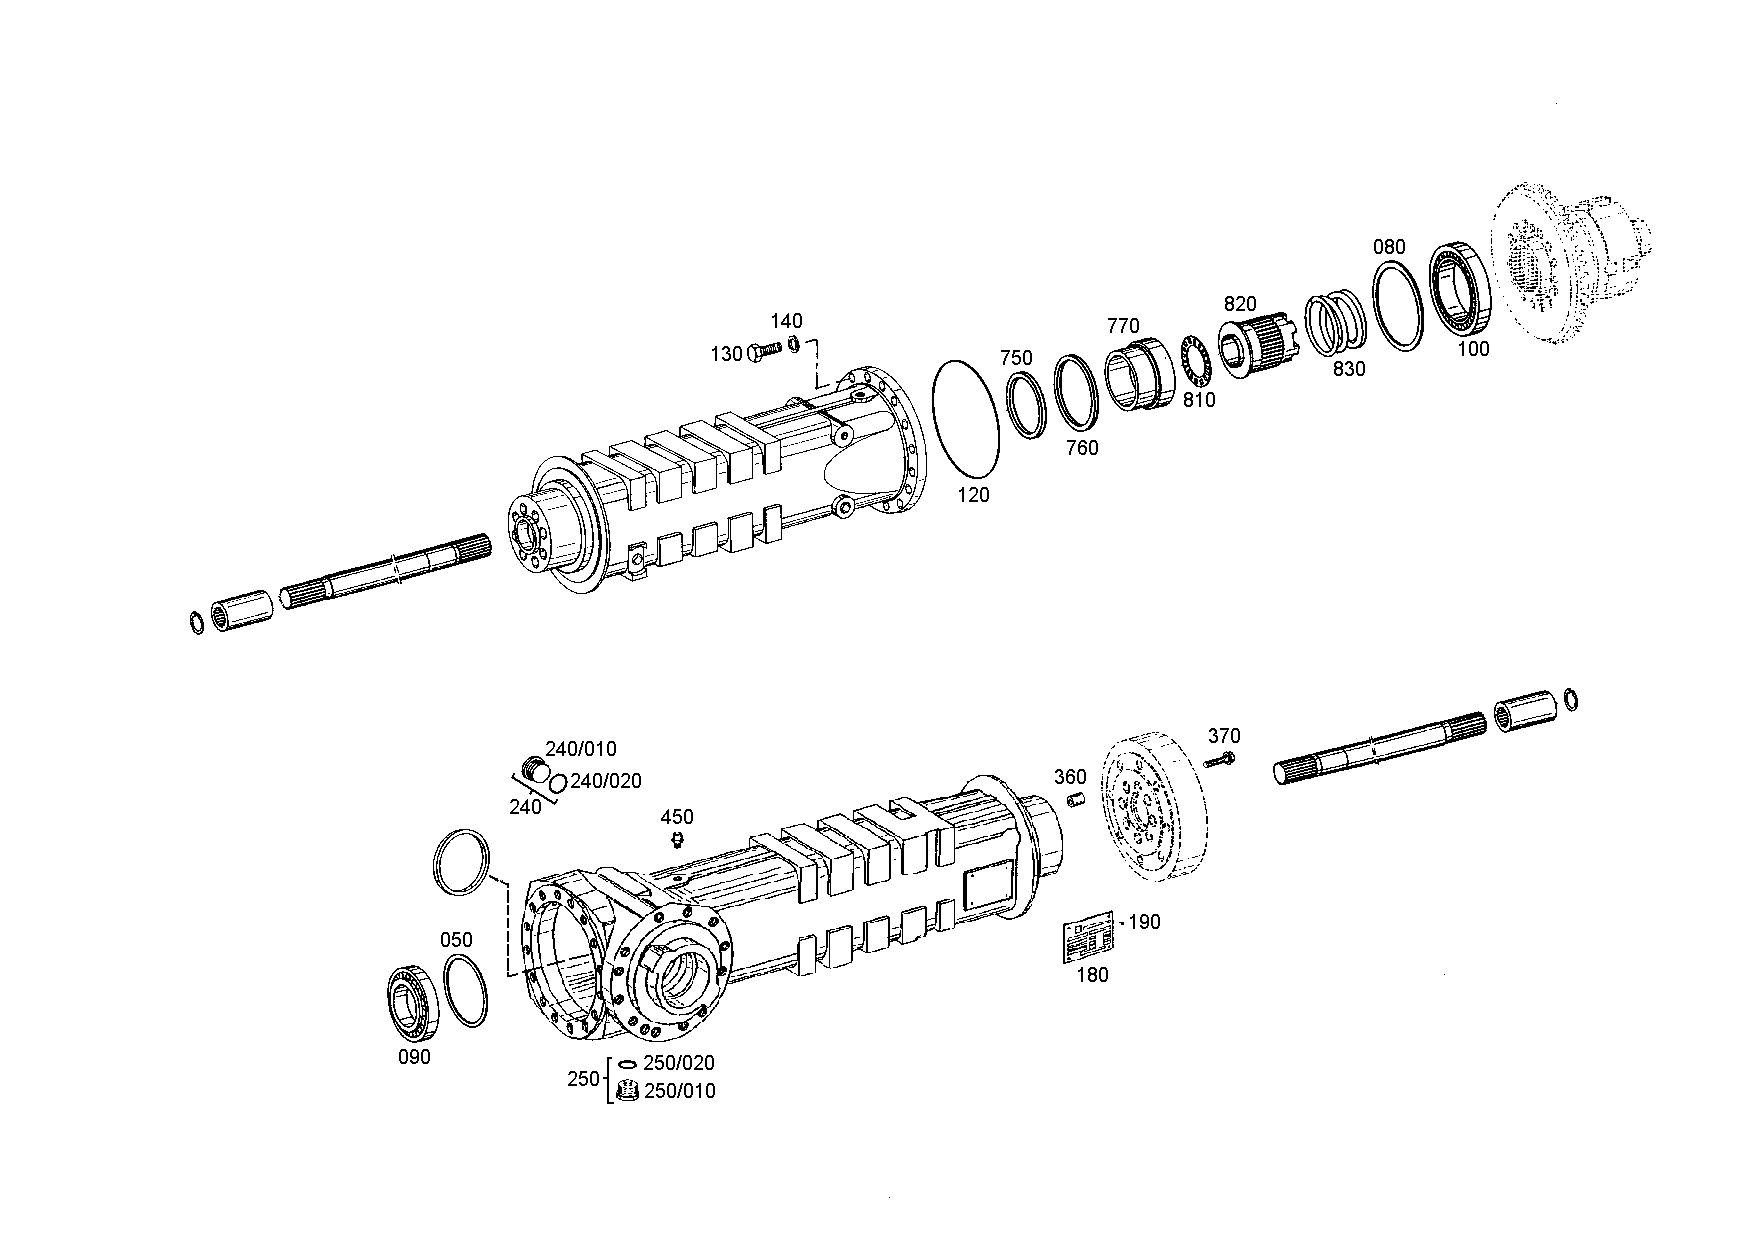 drawing for KRAMER WERKE GMBH 0000800927 - AXIAL NEEDLE CAGE (figure 5)